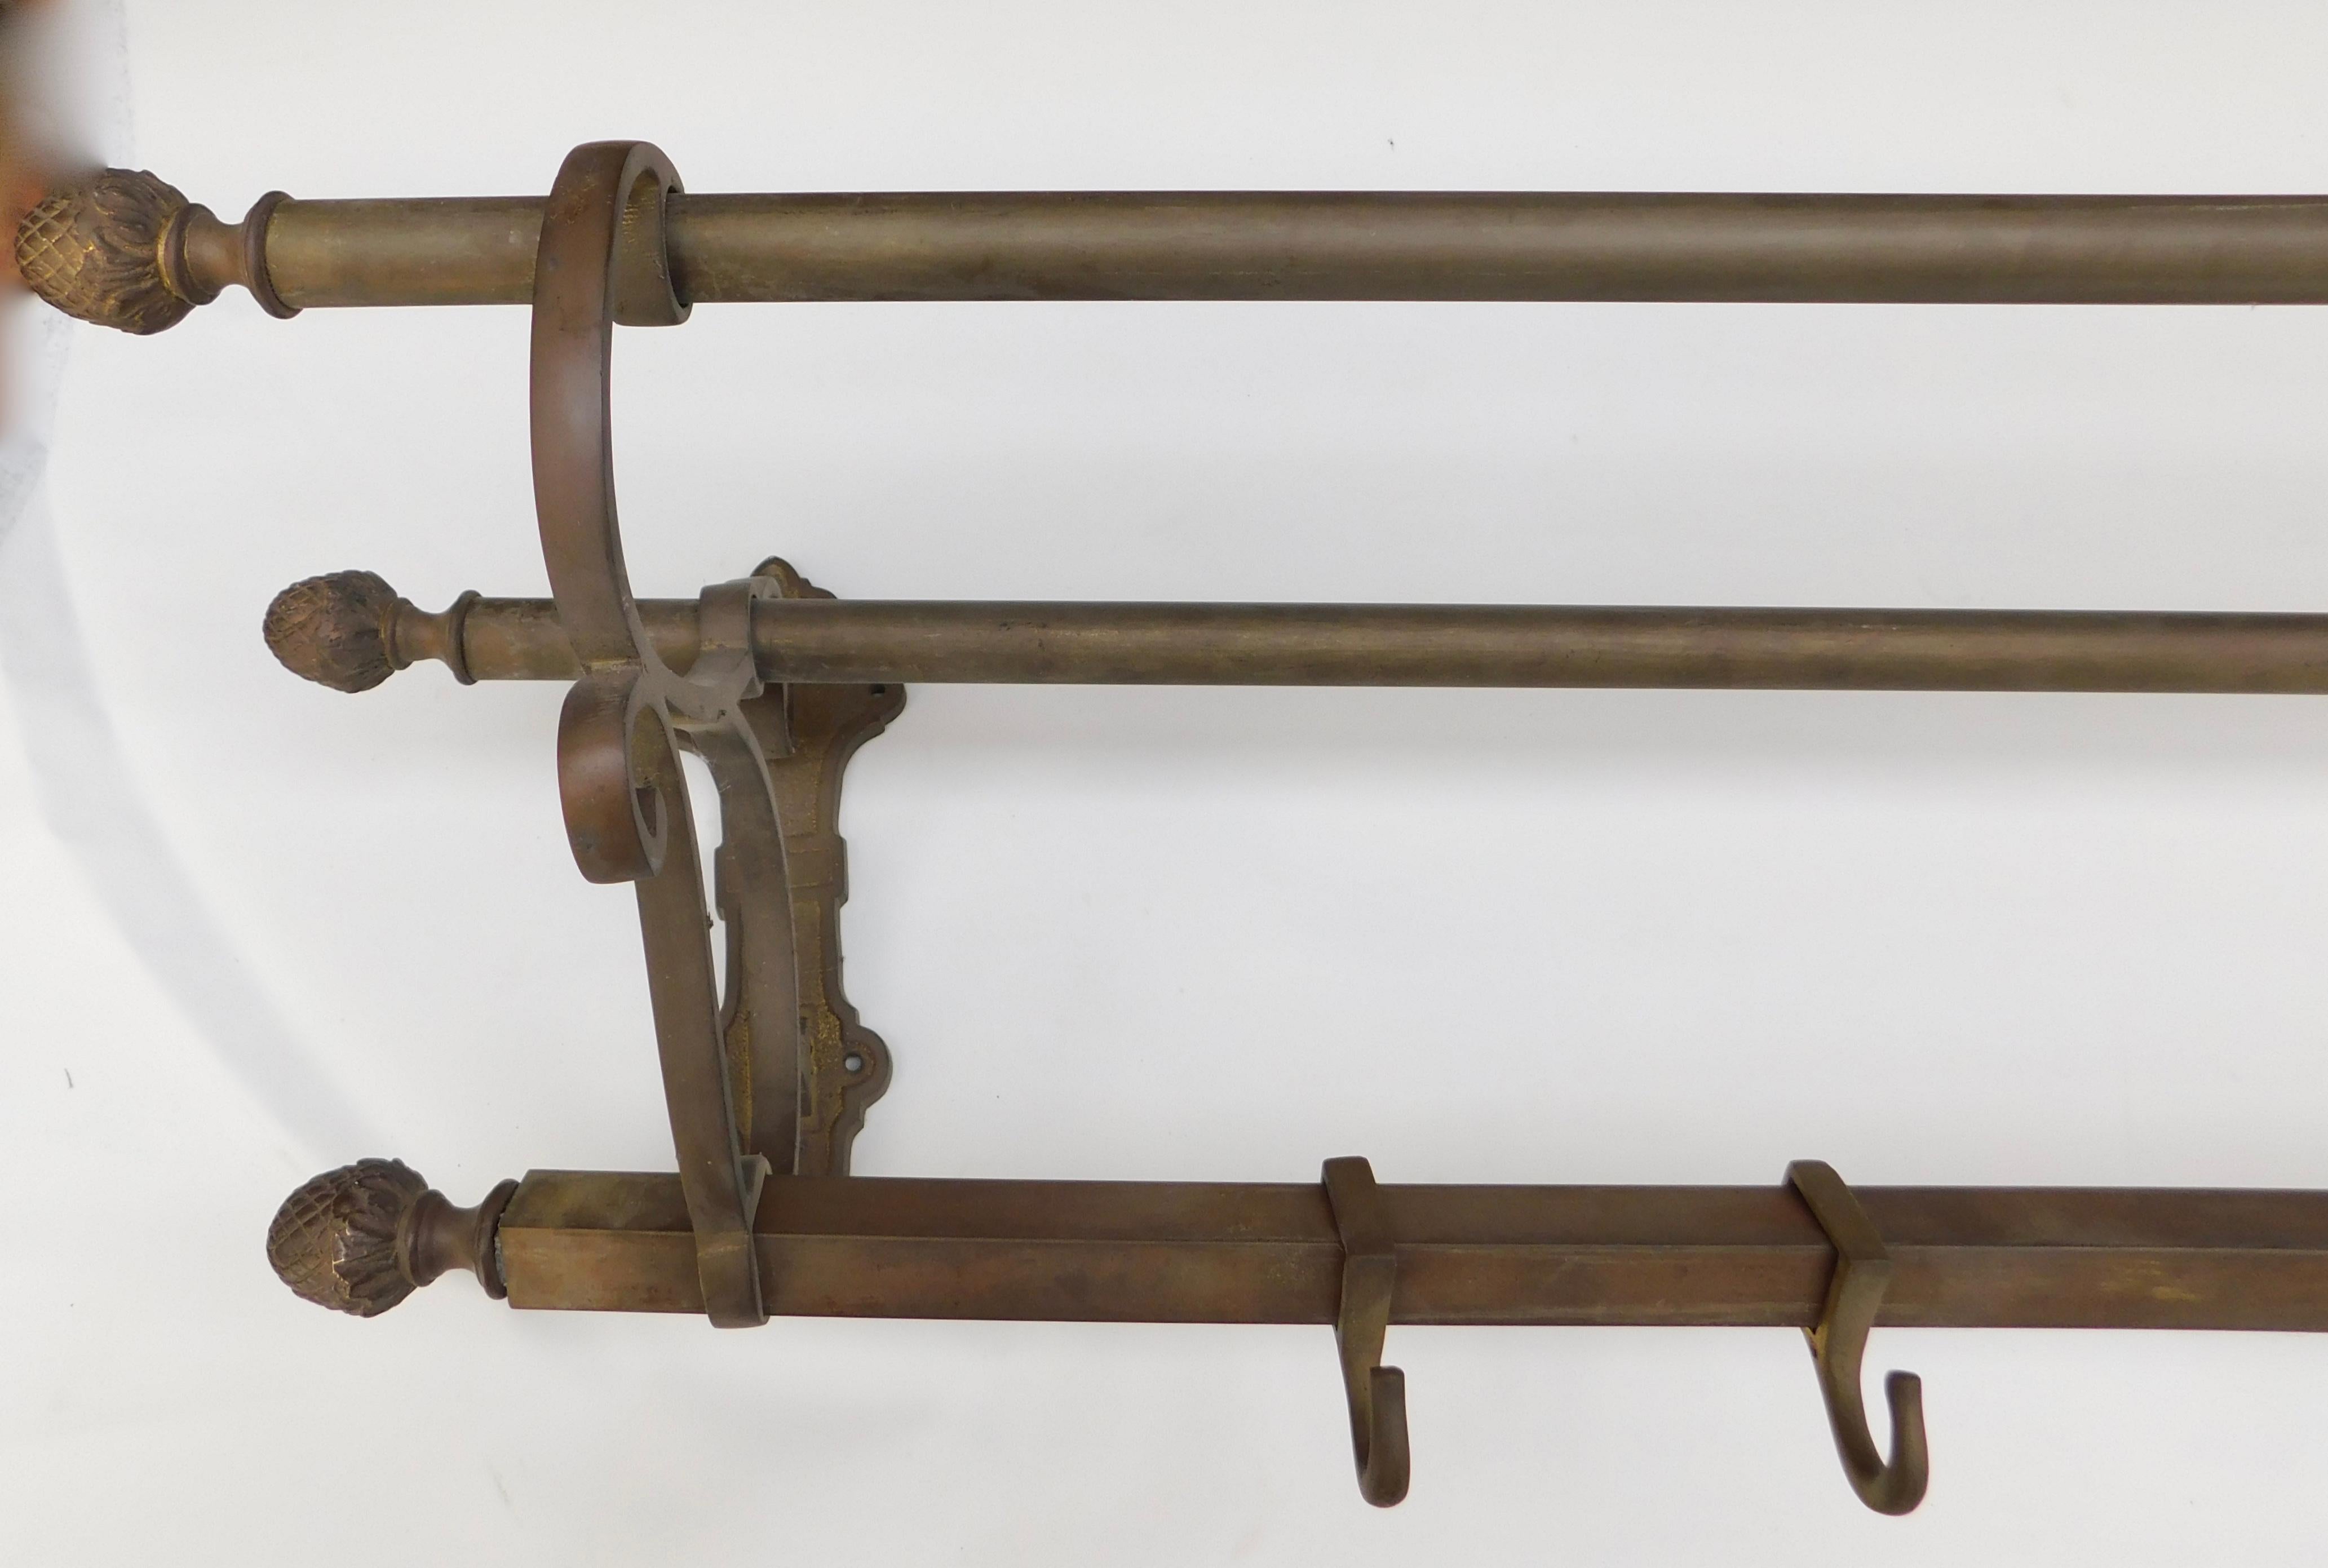 French brass shelf /rack with a beautiful patina achieved with time and use. Sliding hooks and pineapple end finials are some of the details that make this a decorative and flexible piece, circa 1880. Great to use for coats, hats and handbags, but